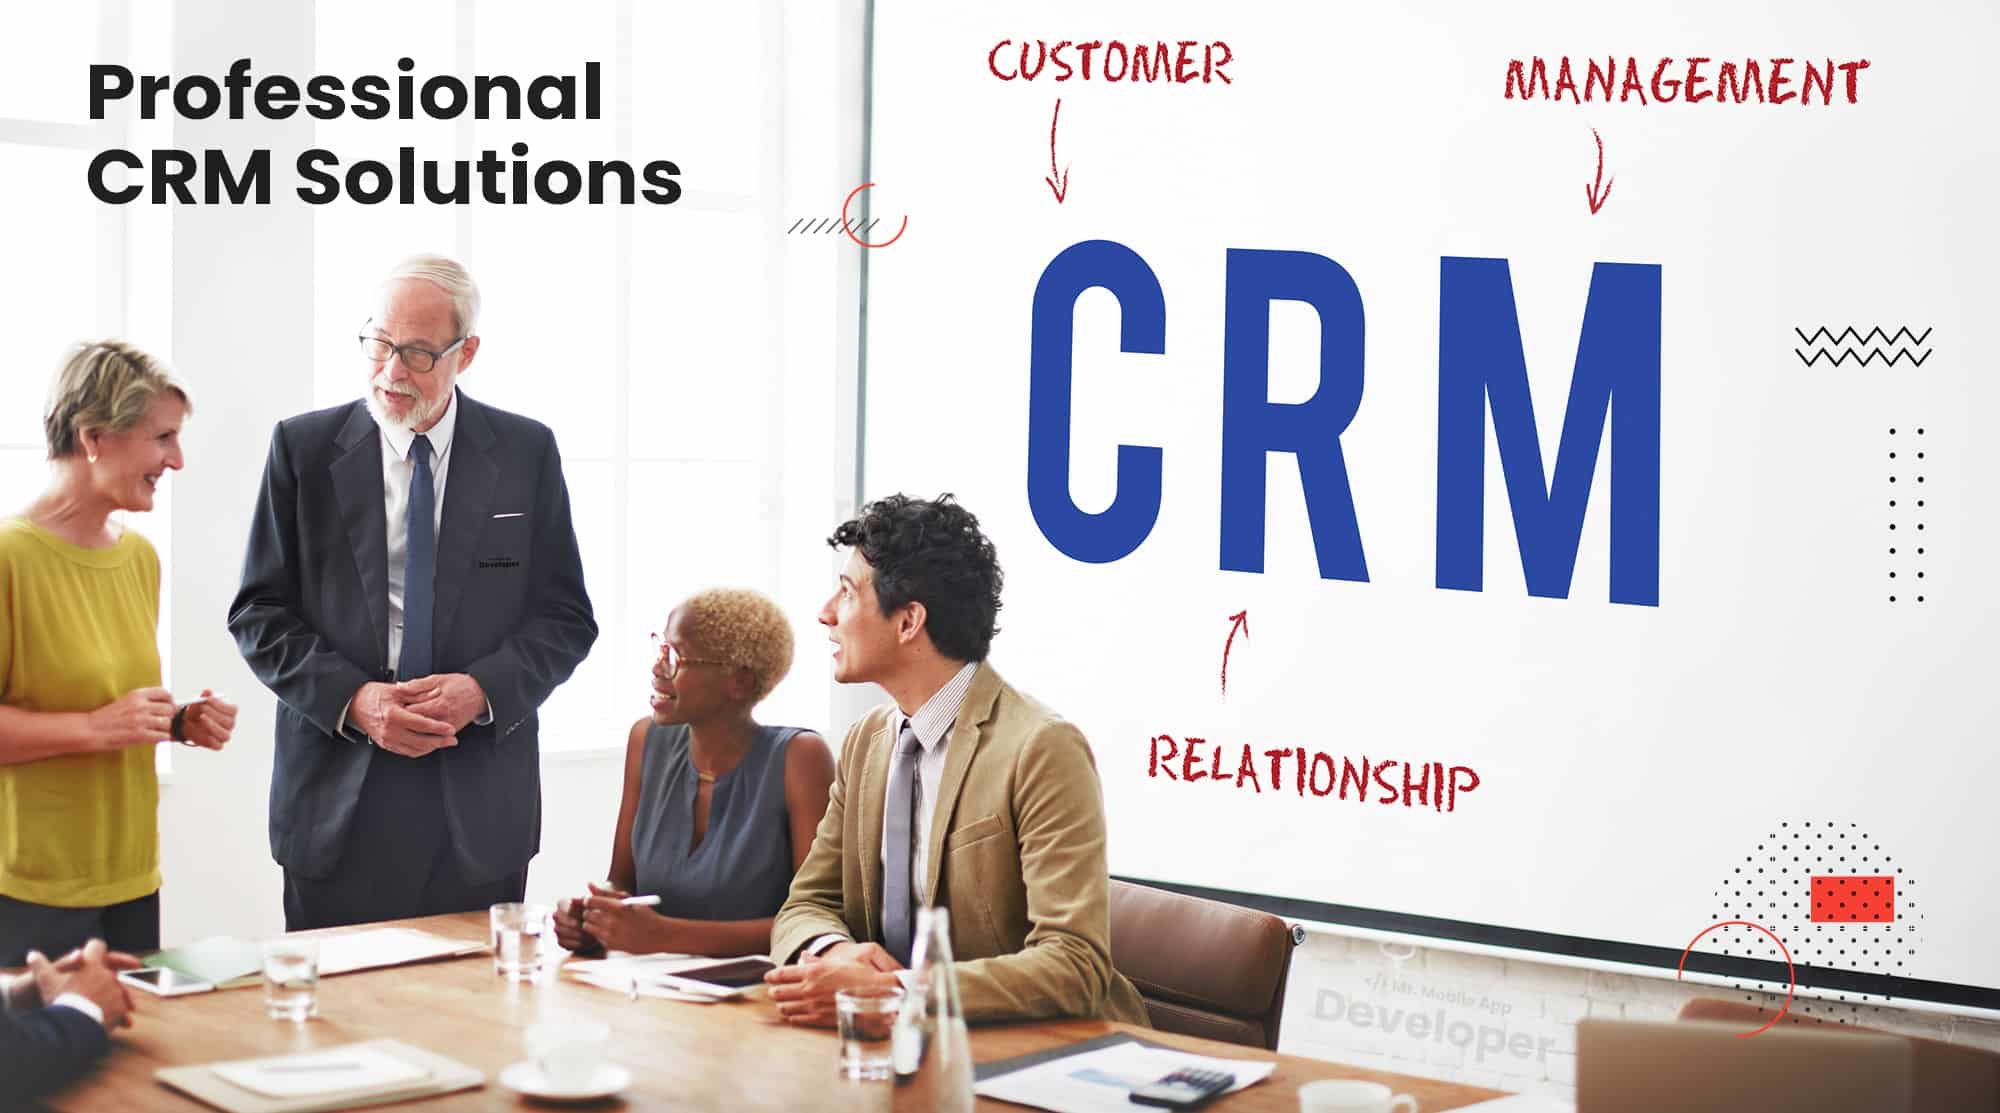 Professional CRM Solutions